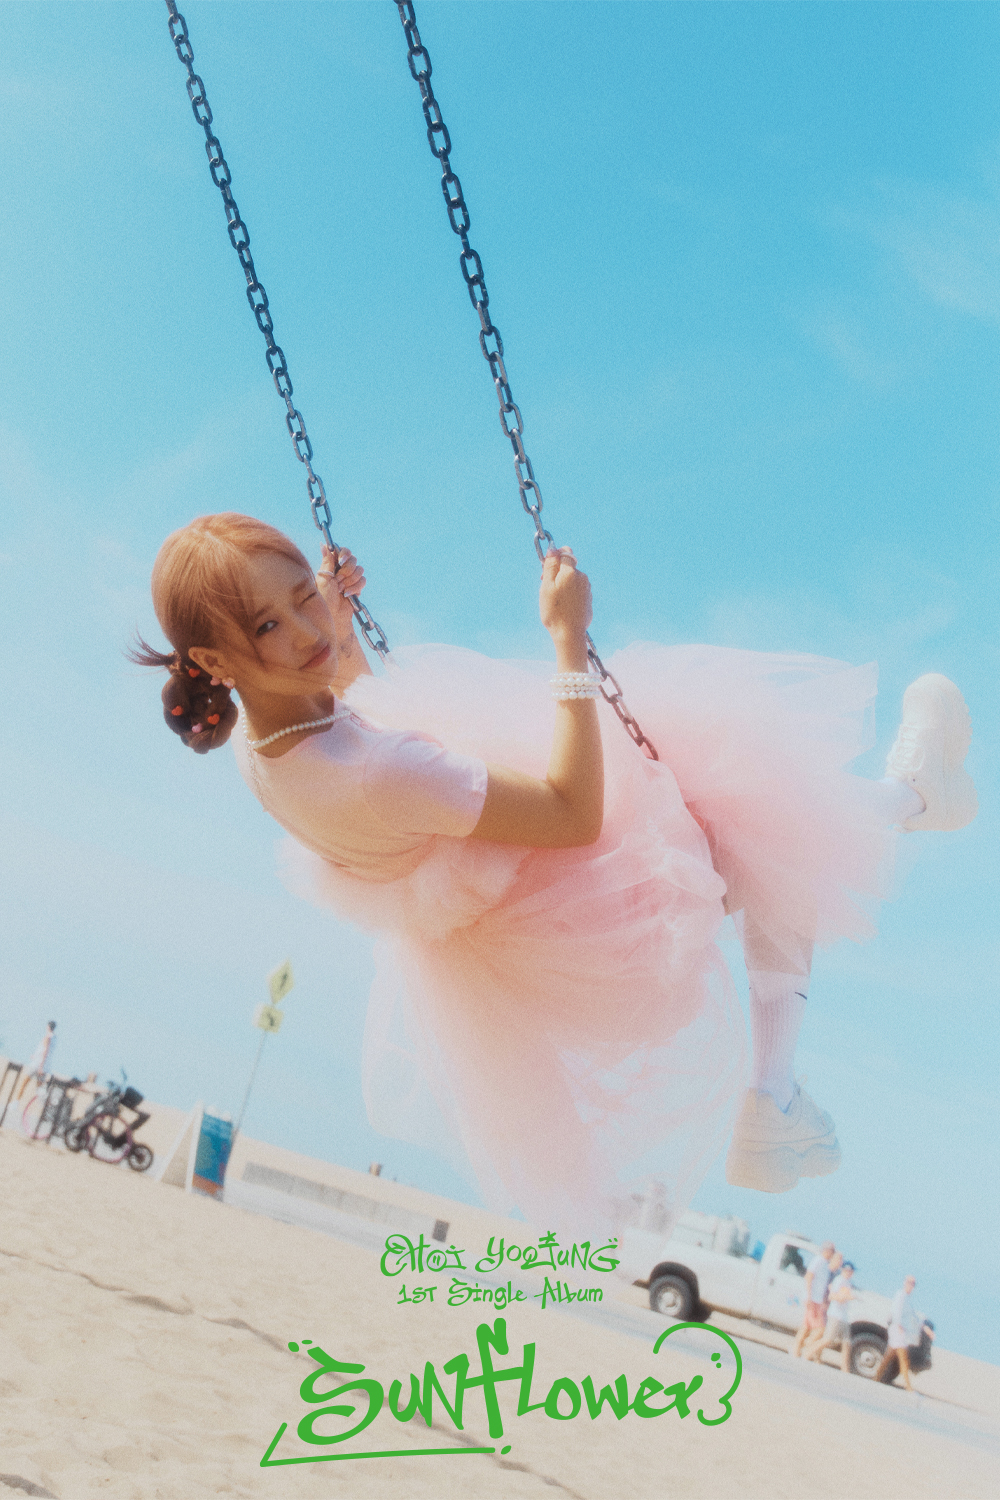 Yoojung releases teaser for solo debut album... 'Lovely' on the swing